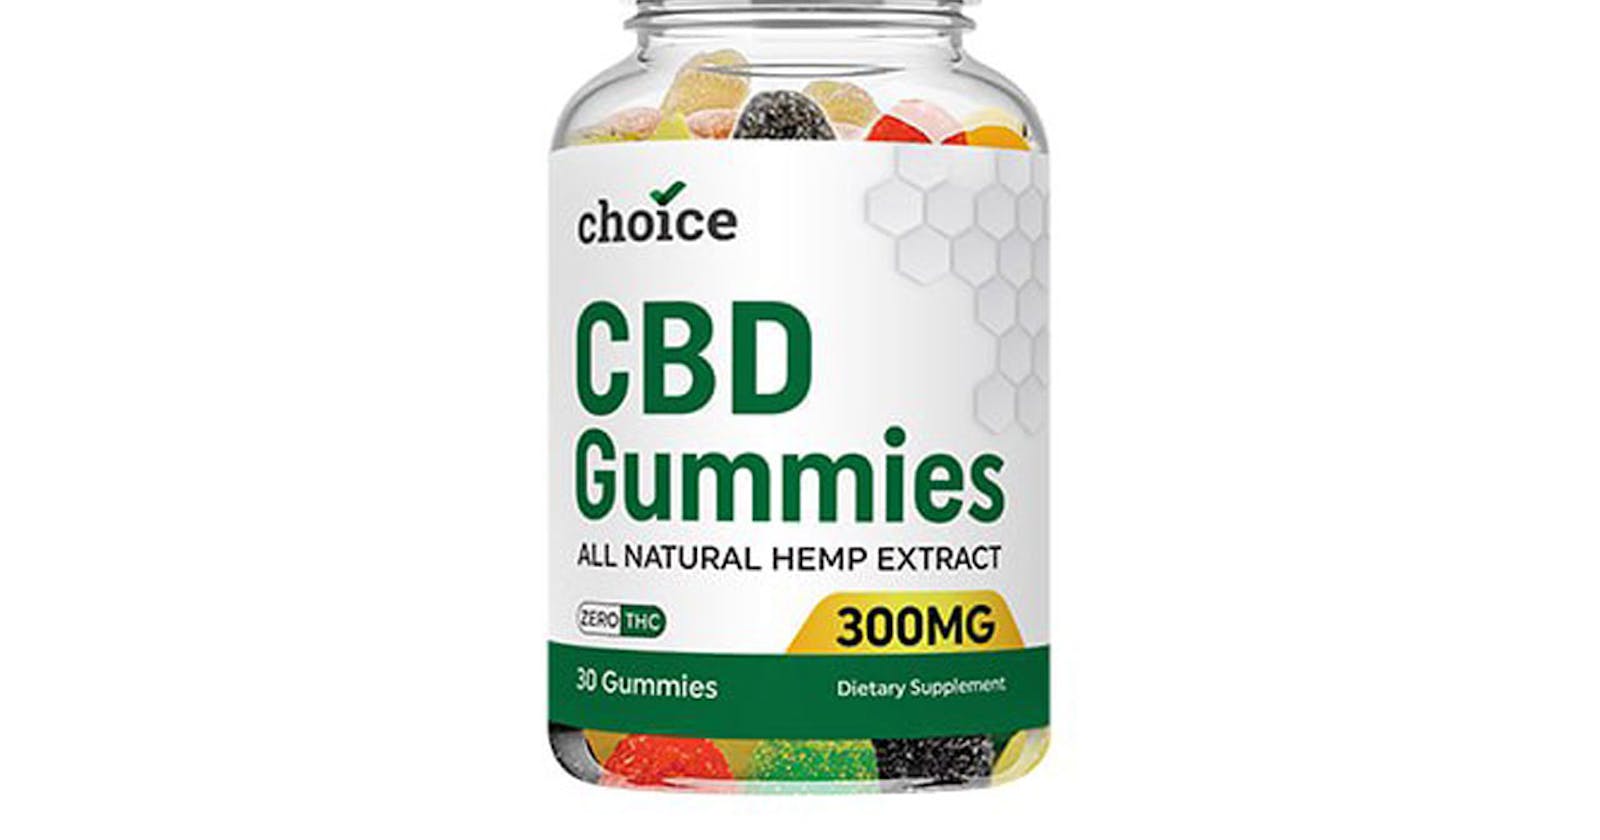 Choice CBD Gummies For ED Shark Tank : Price, Details, Reviews & More Info To Buy!